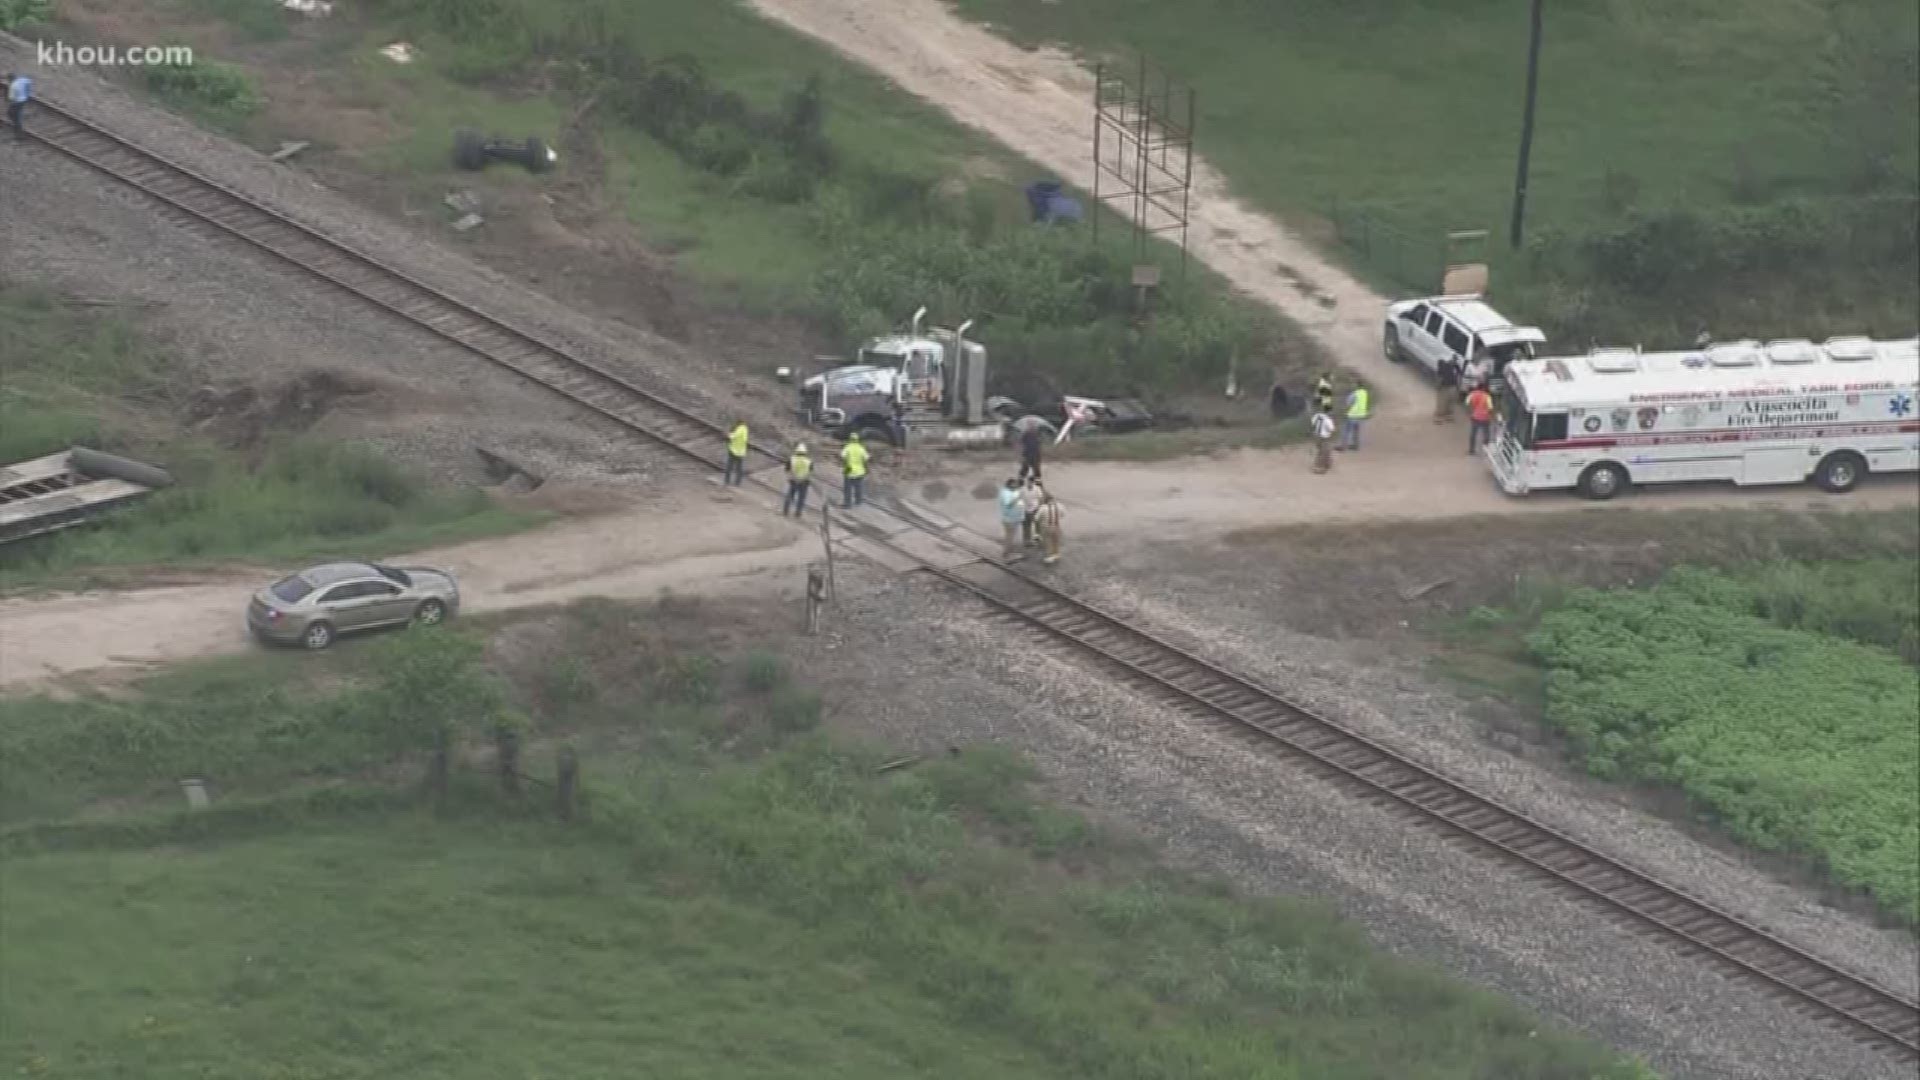 19 people were injured Friday after an Amtrak train derailed and collided with an 18-wheeler in Liberty County.